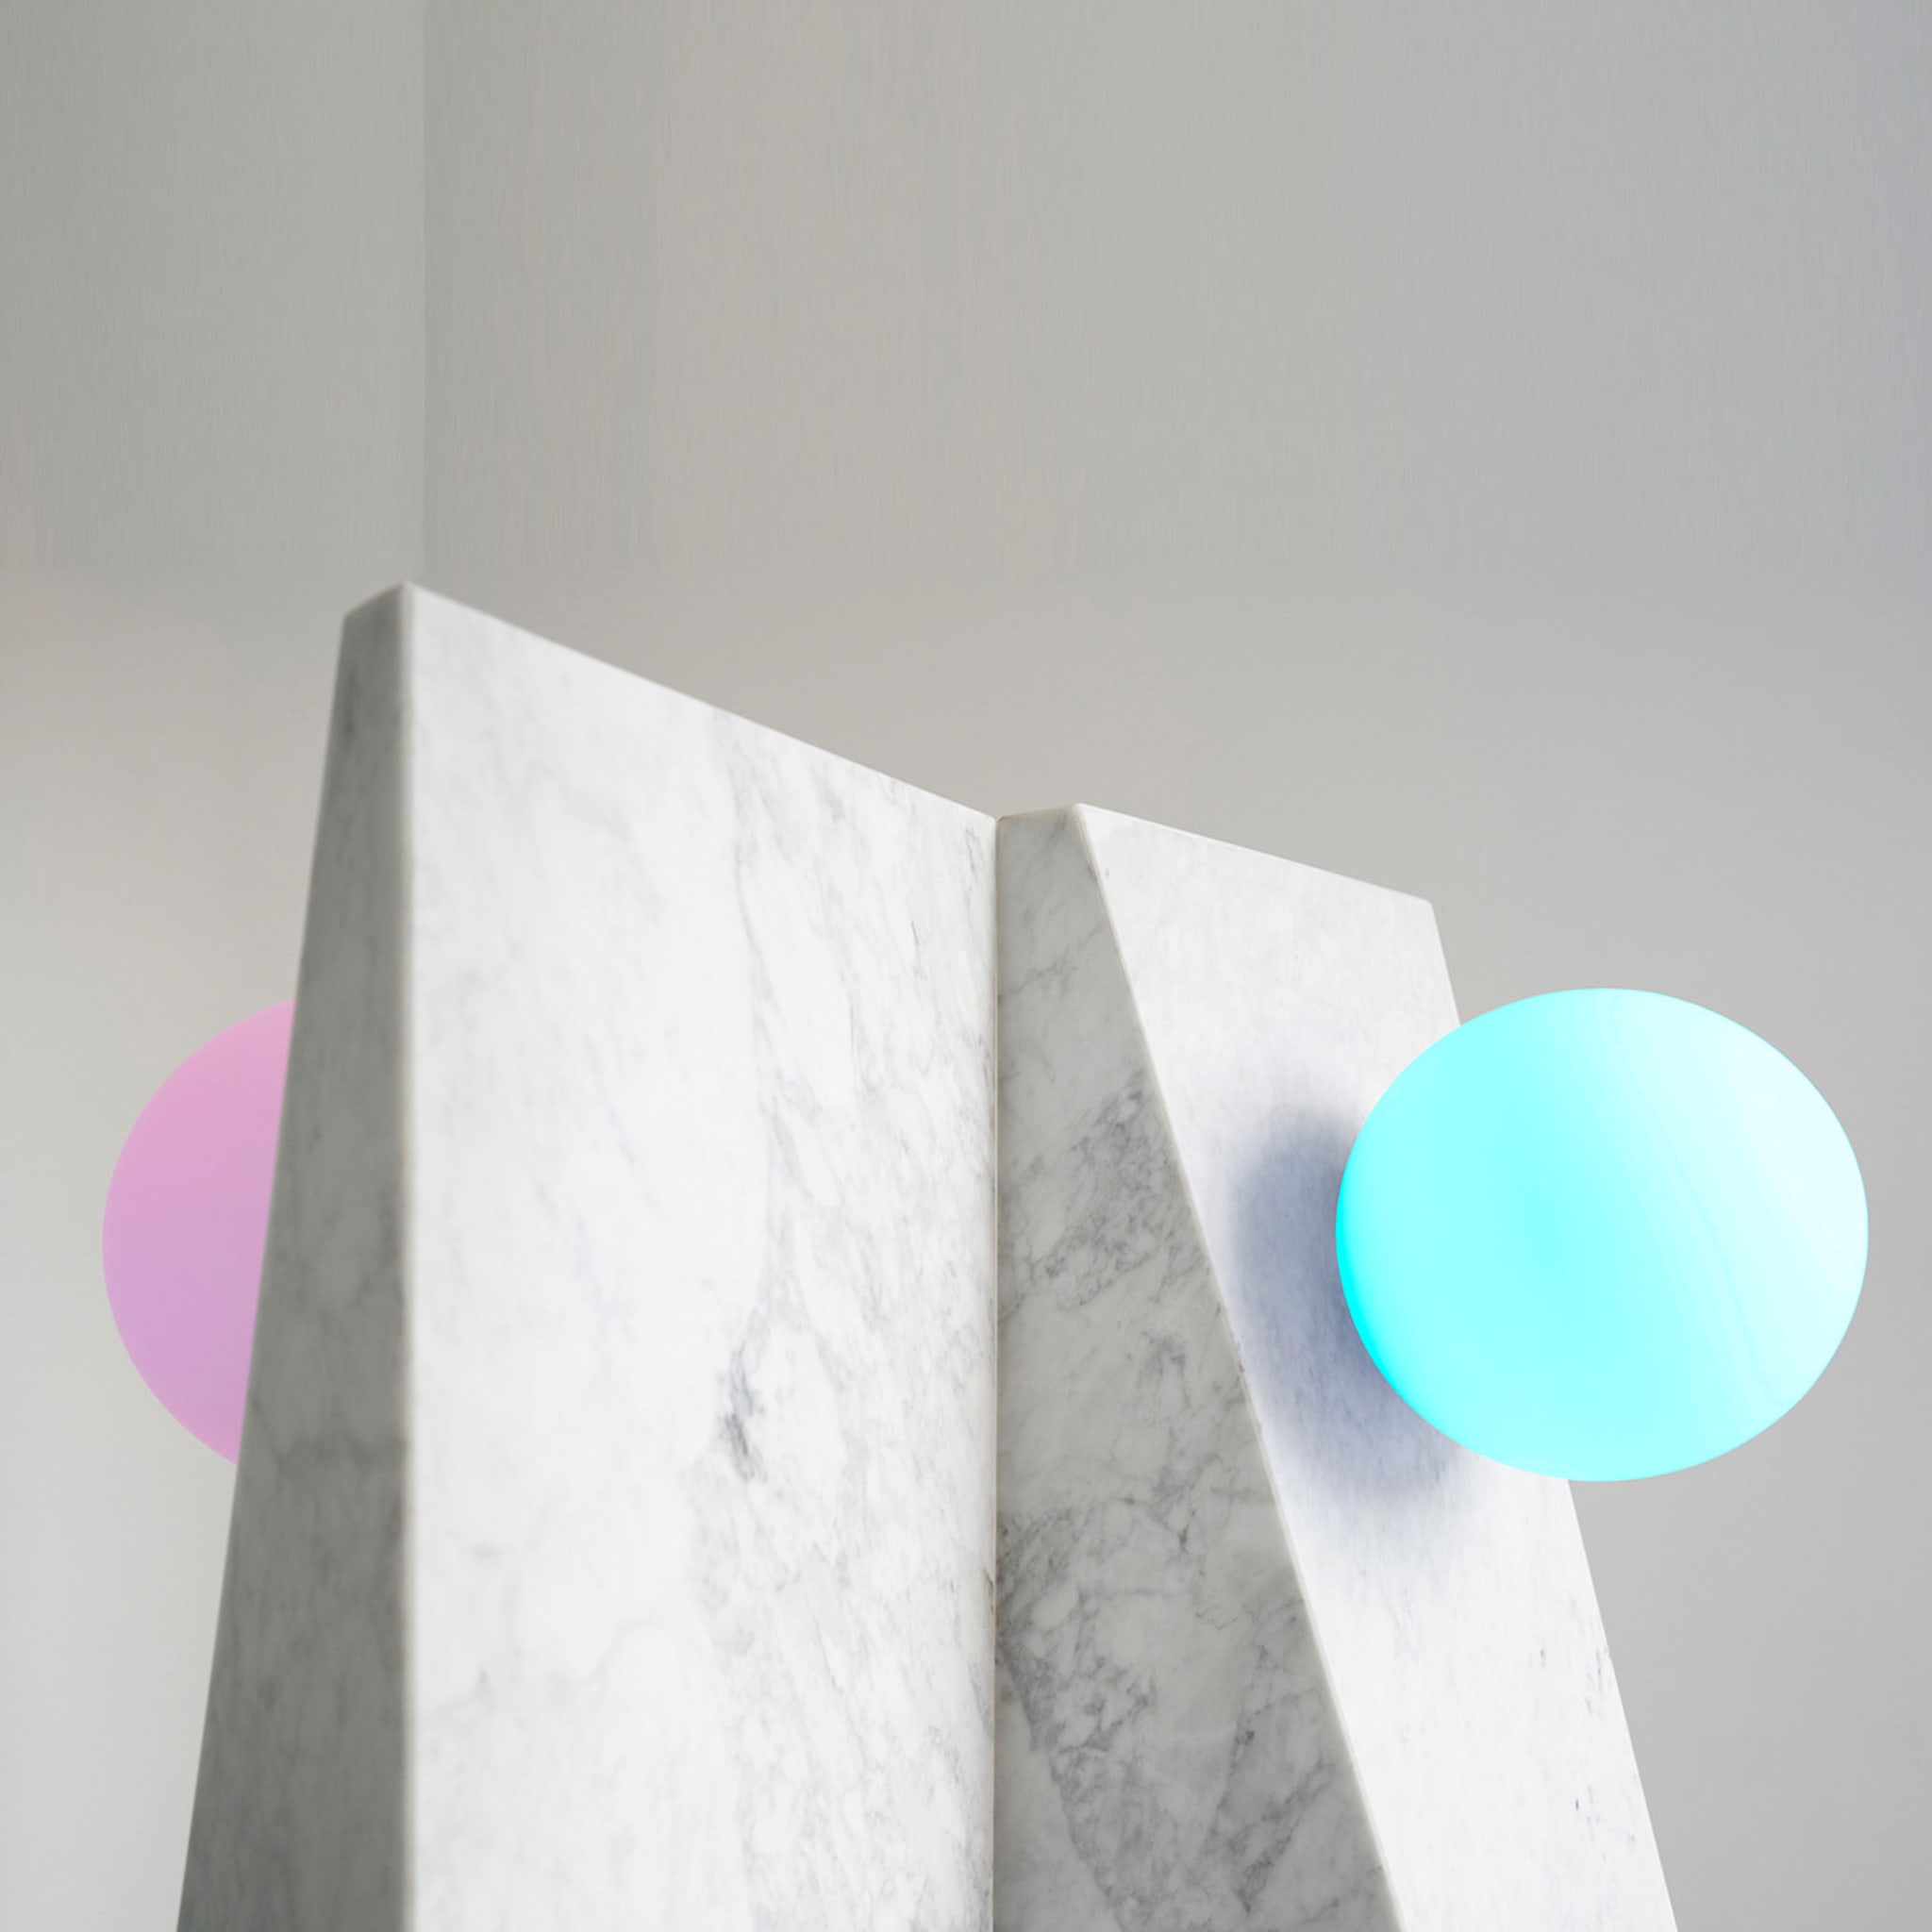 Dieus White Extra Large Floor Lamp by Sid&Sign Studio - Alternative view 1